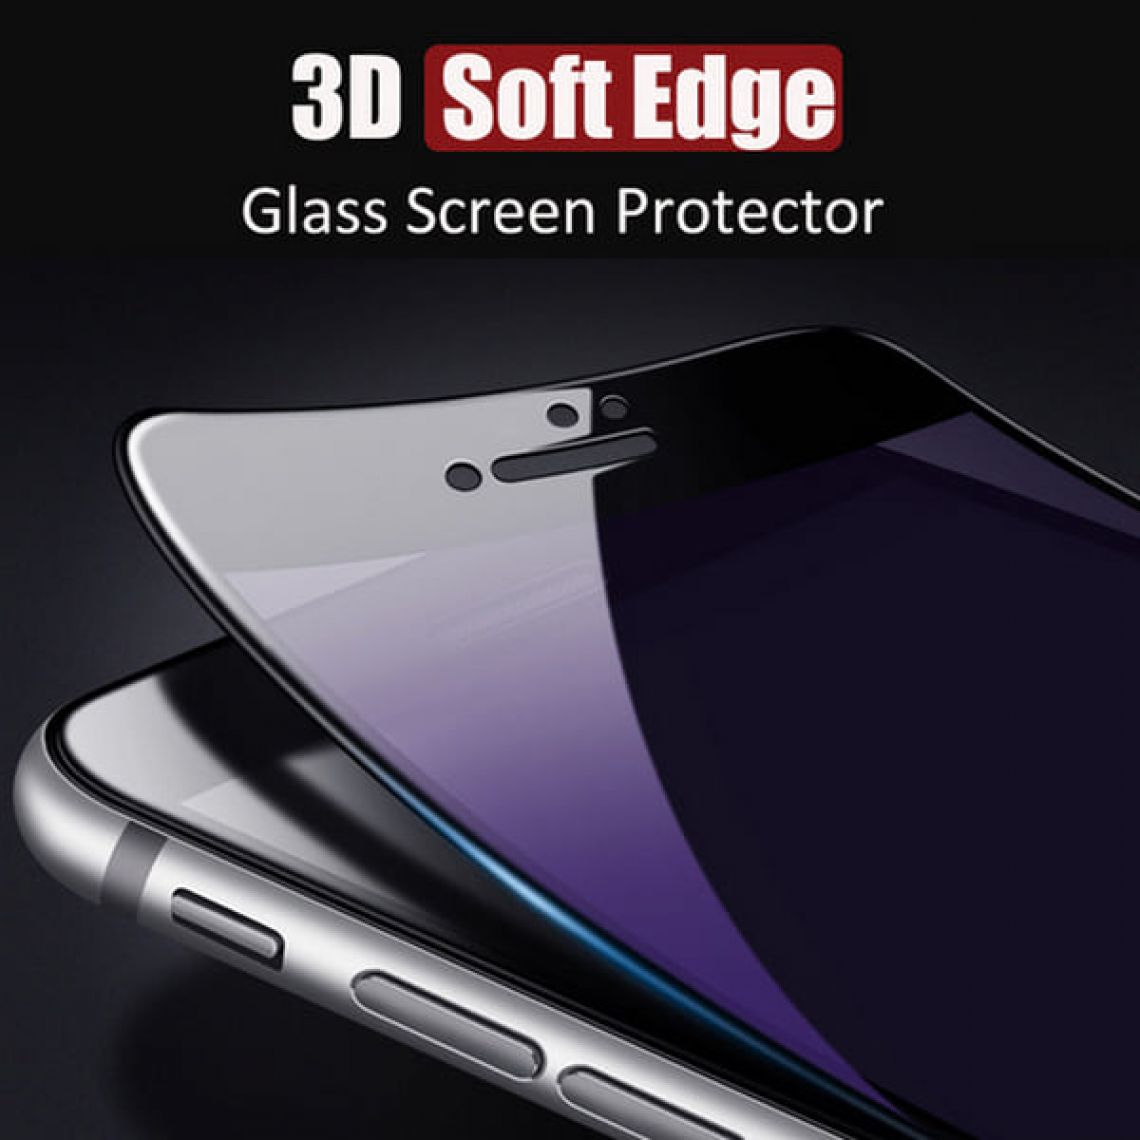 The Reliable Tempered Glass Screen Protector Company Can Offer Best Protection To Your Mobile Display 